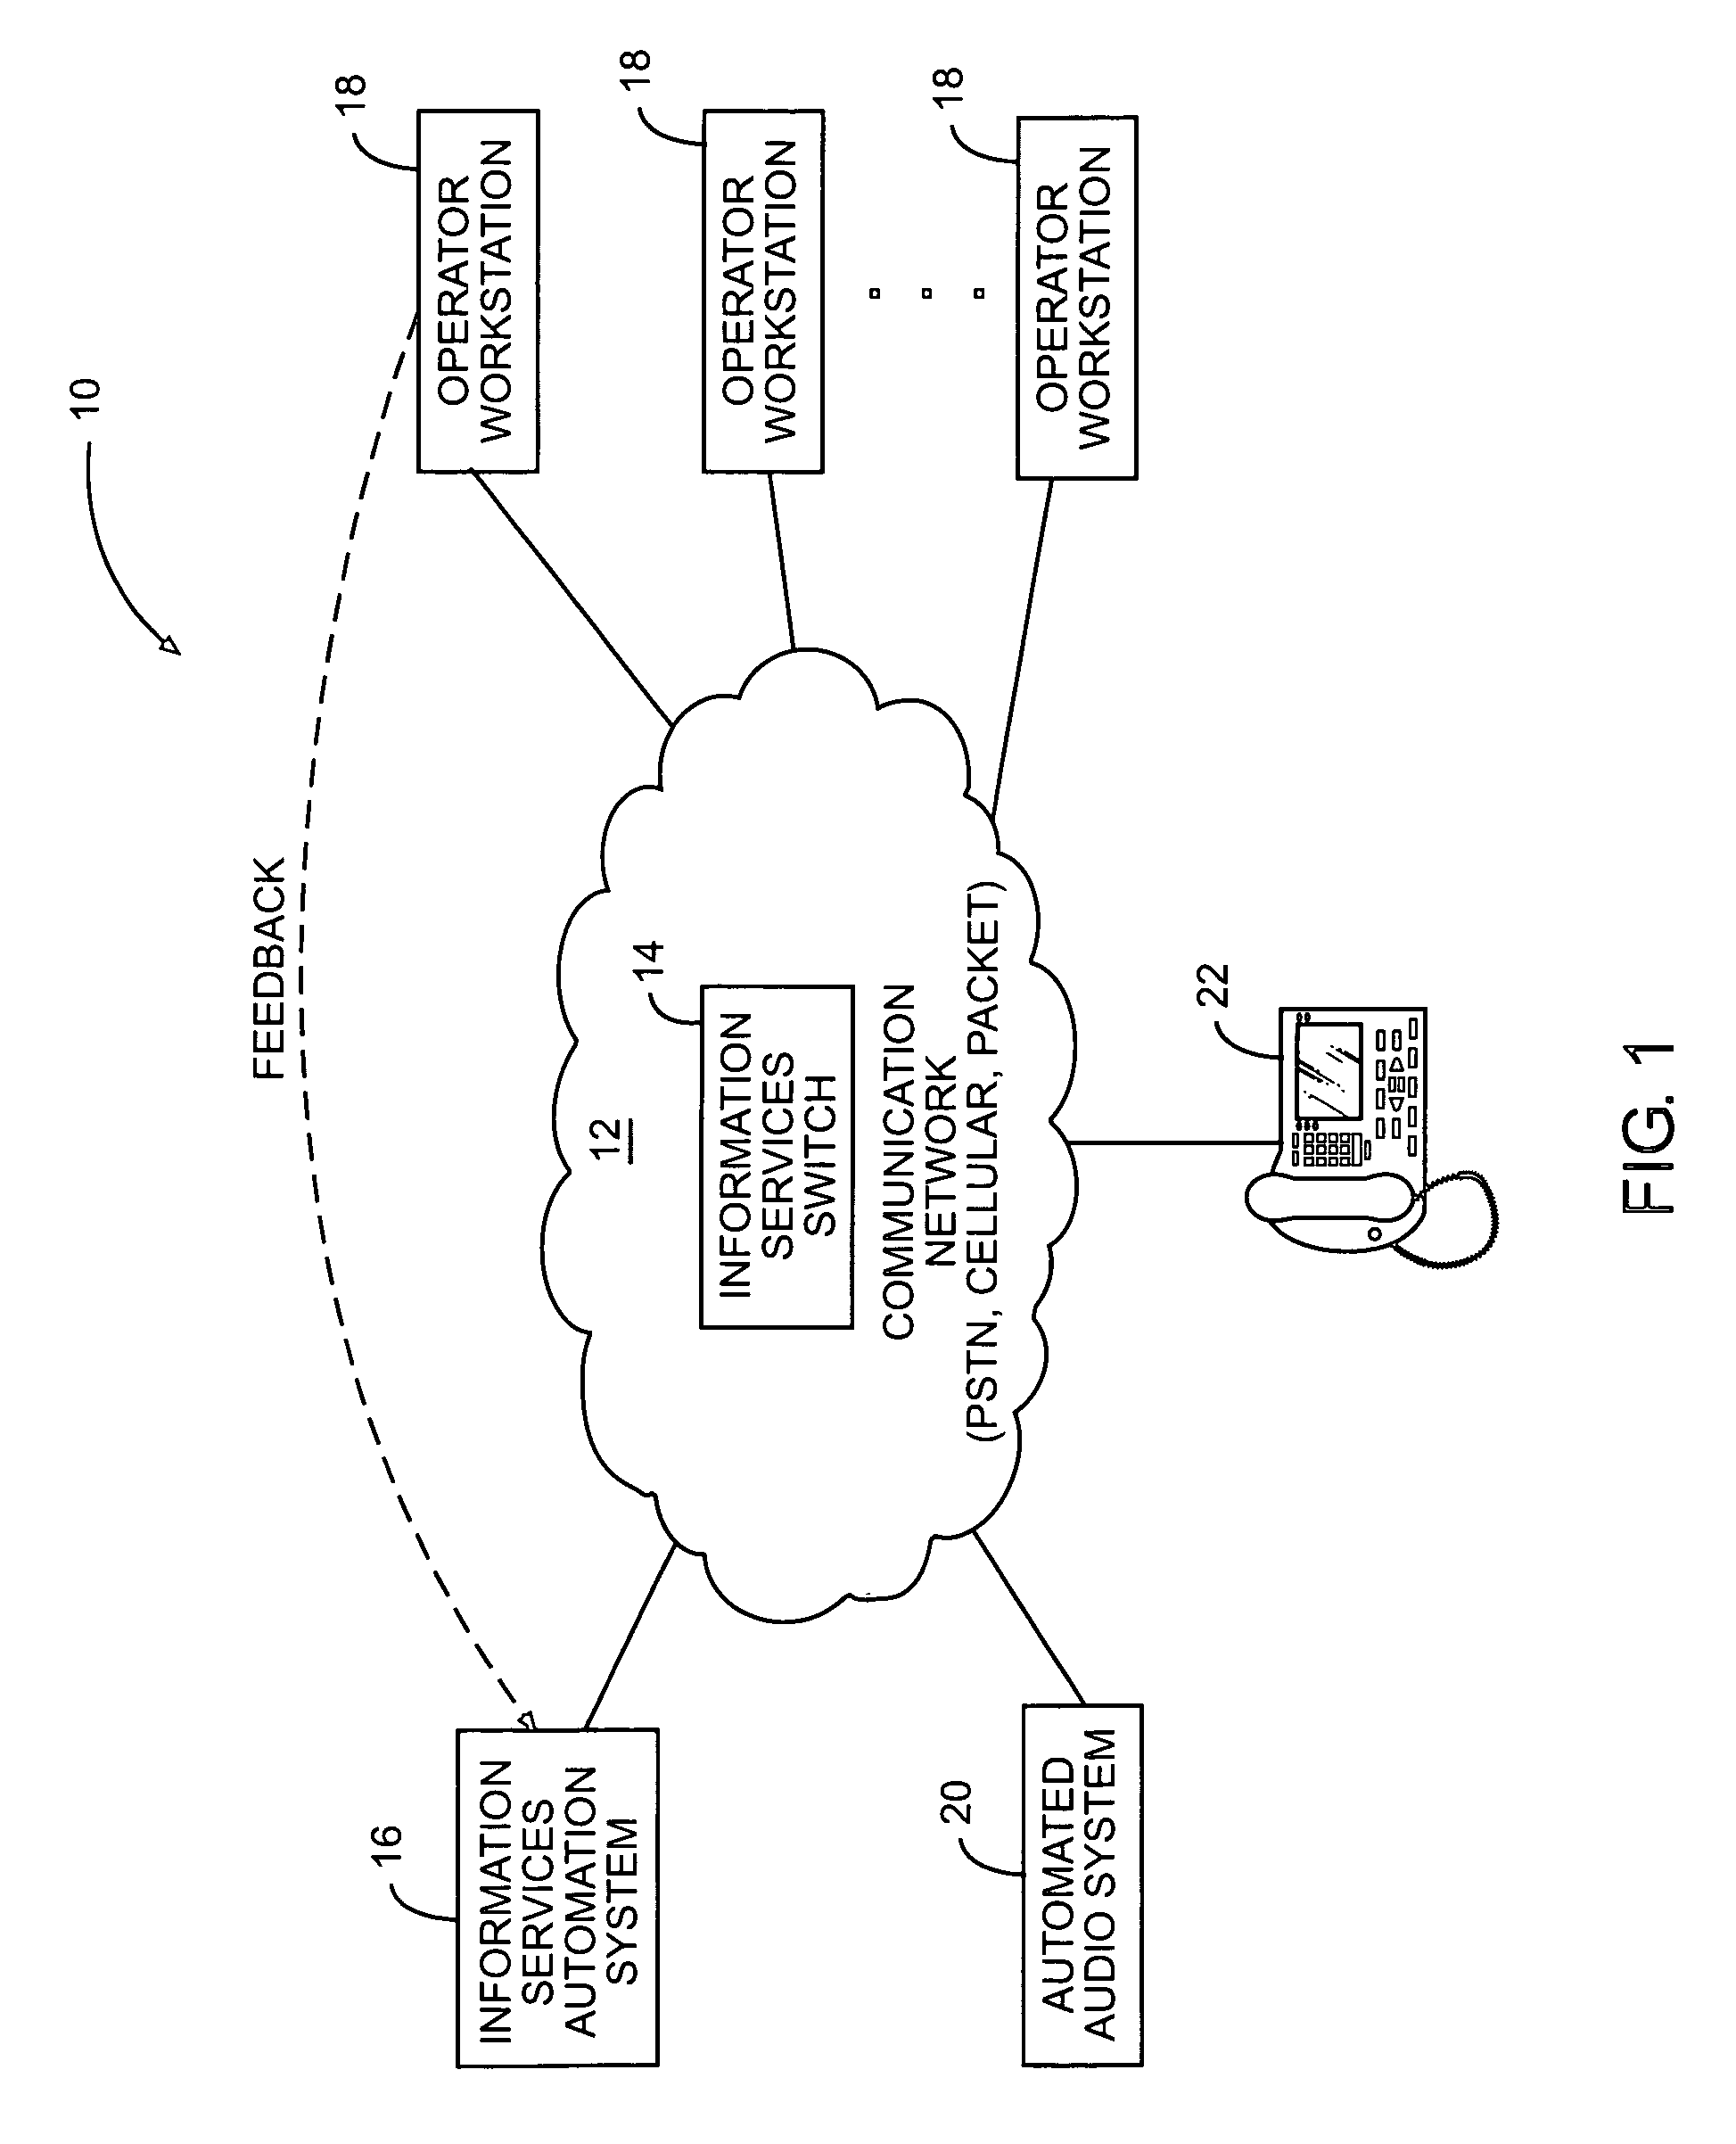 Speech recognition in automated information services systems